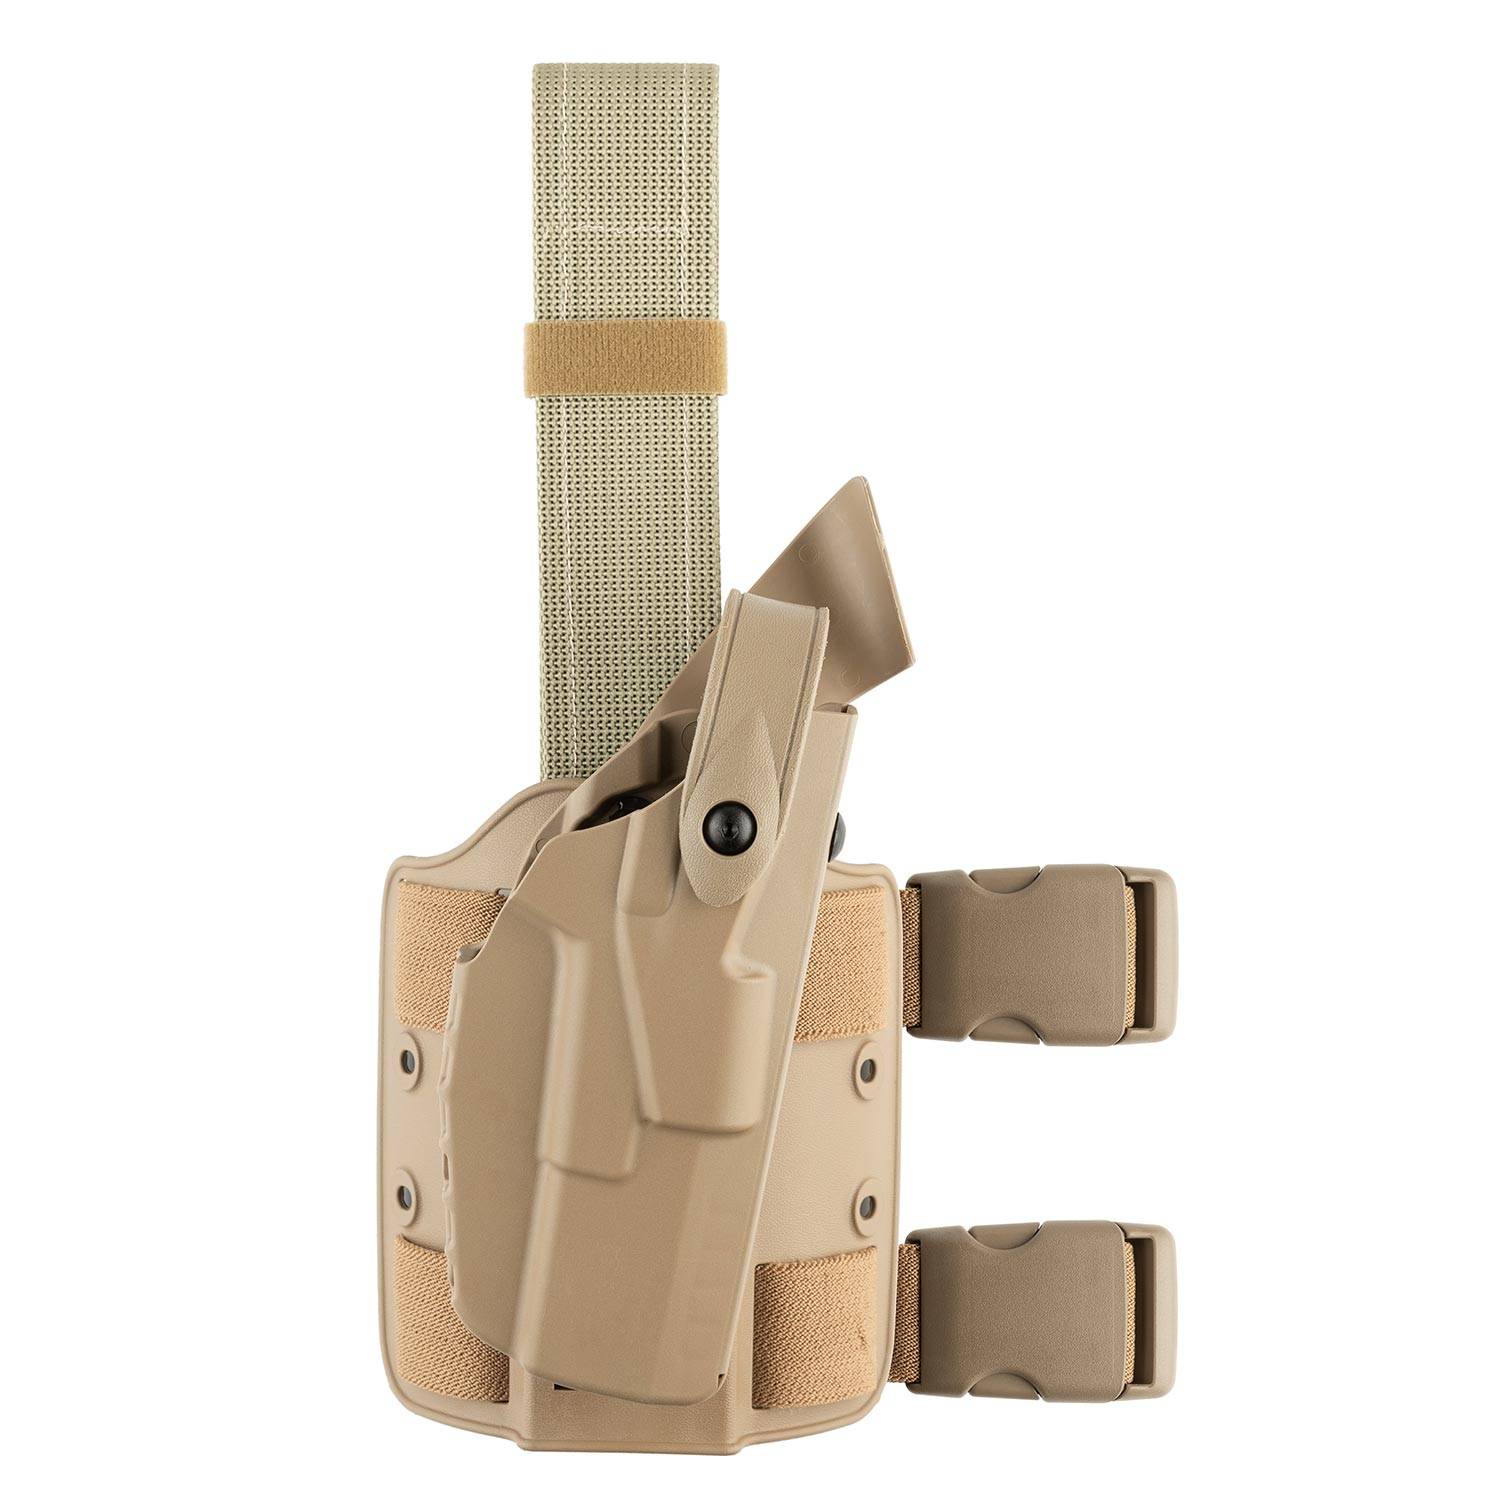 Connecting safariland holster to drop leg platform do I need to